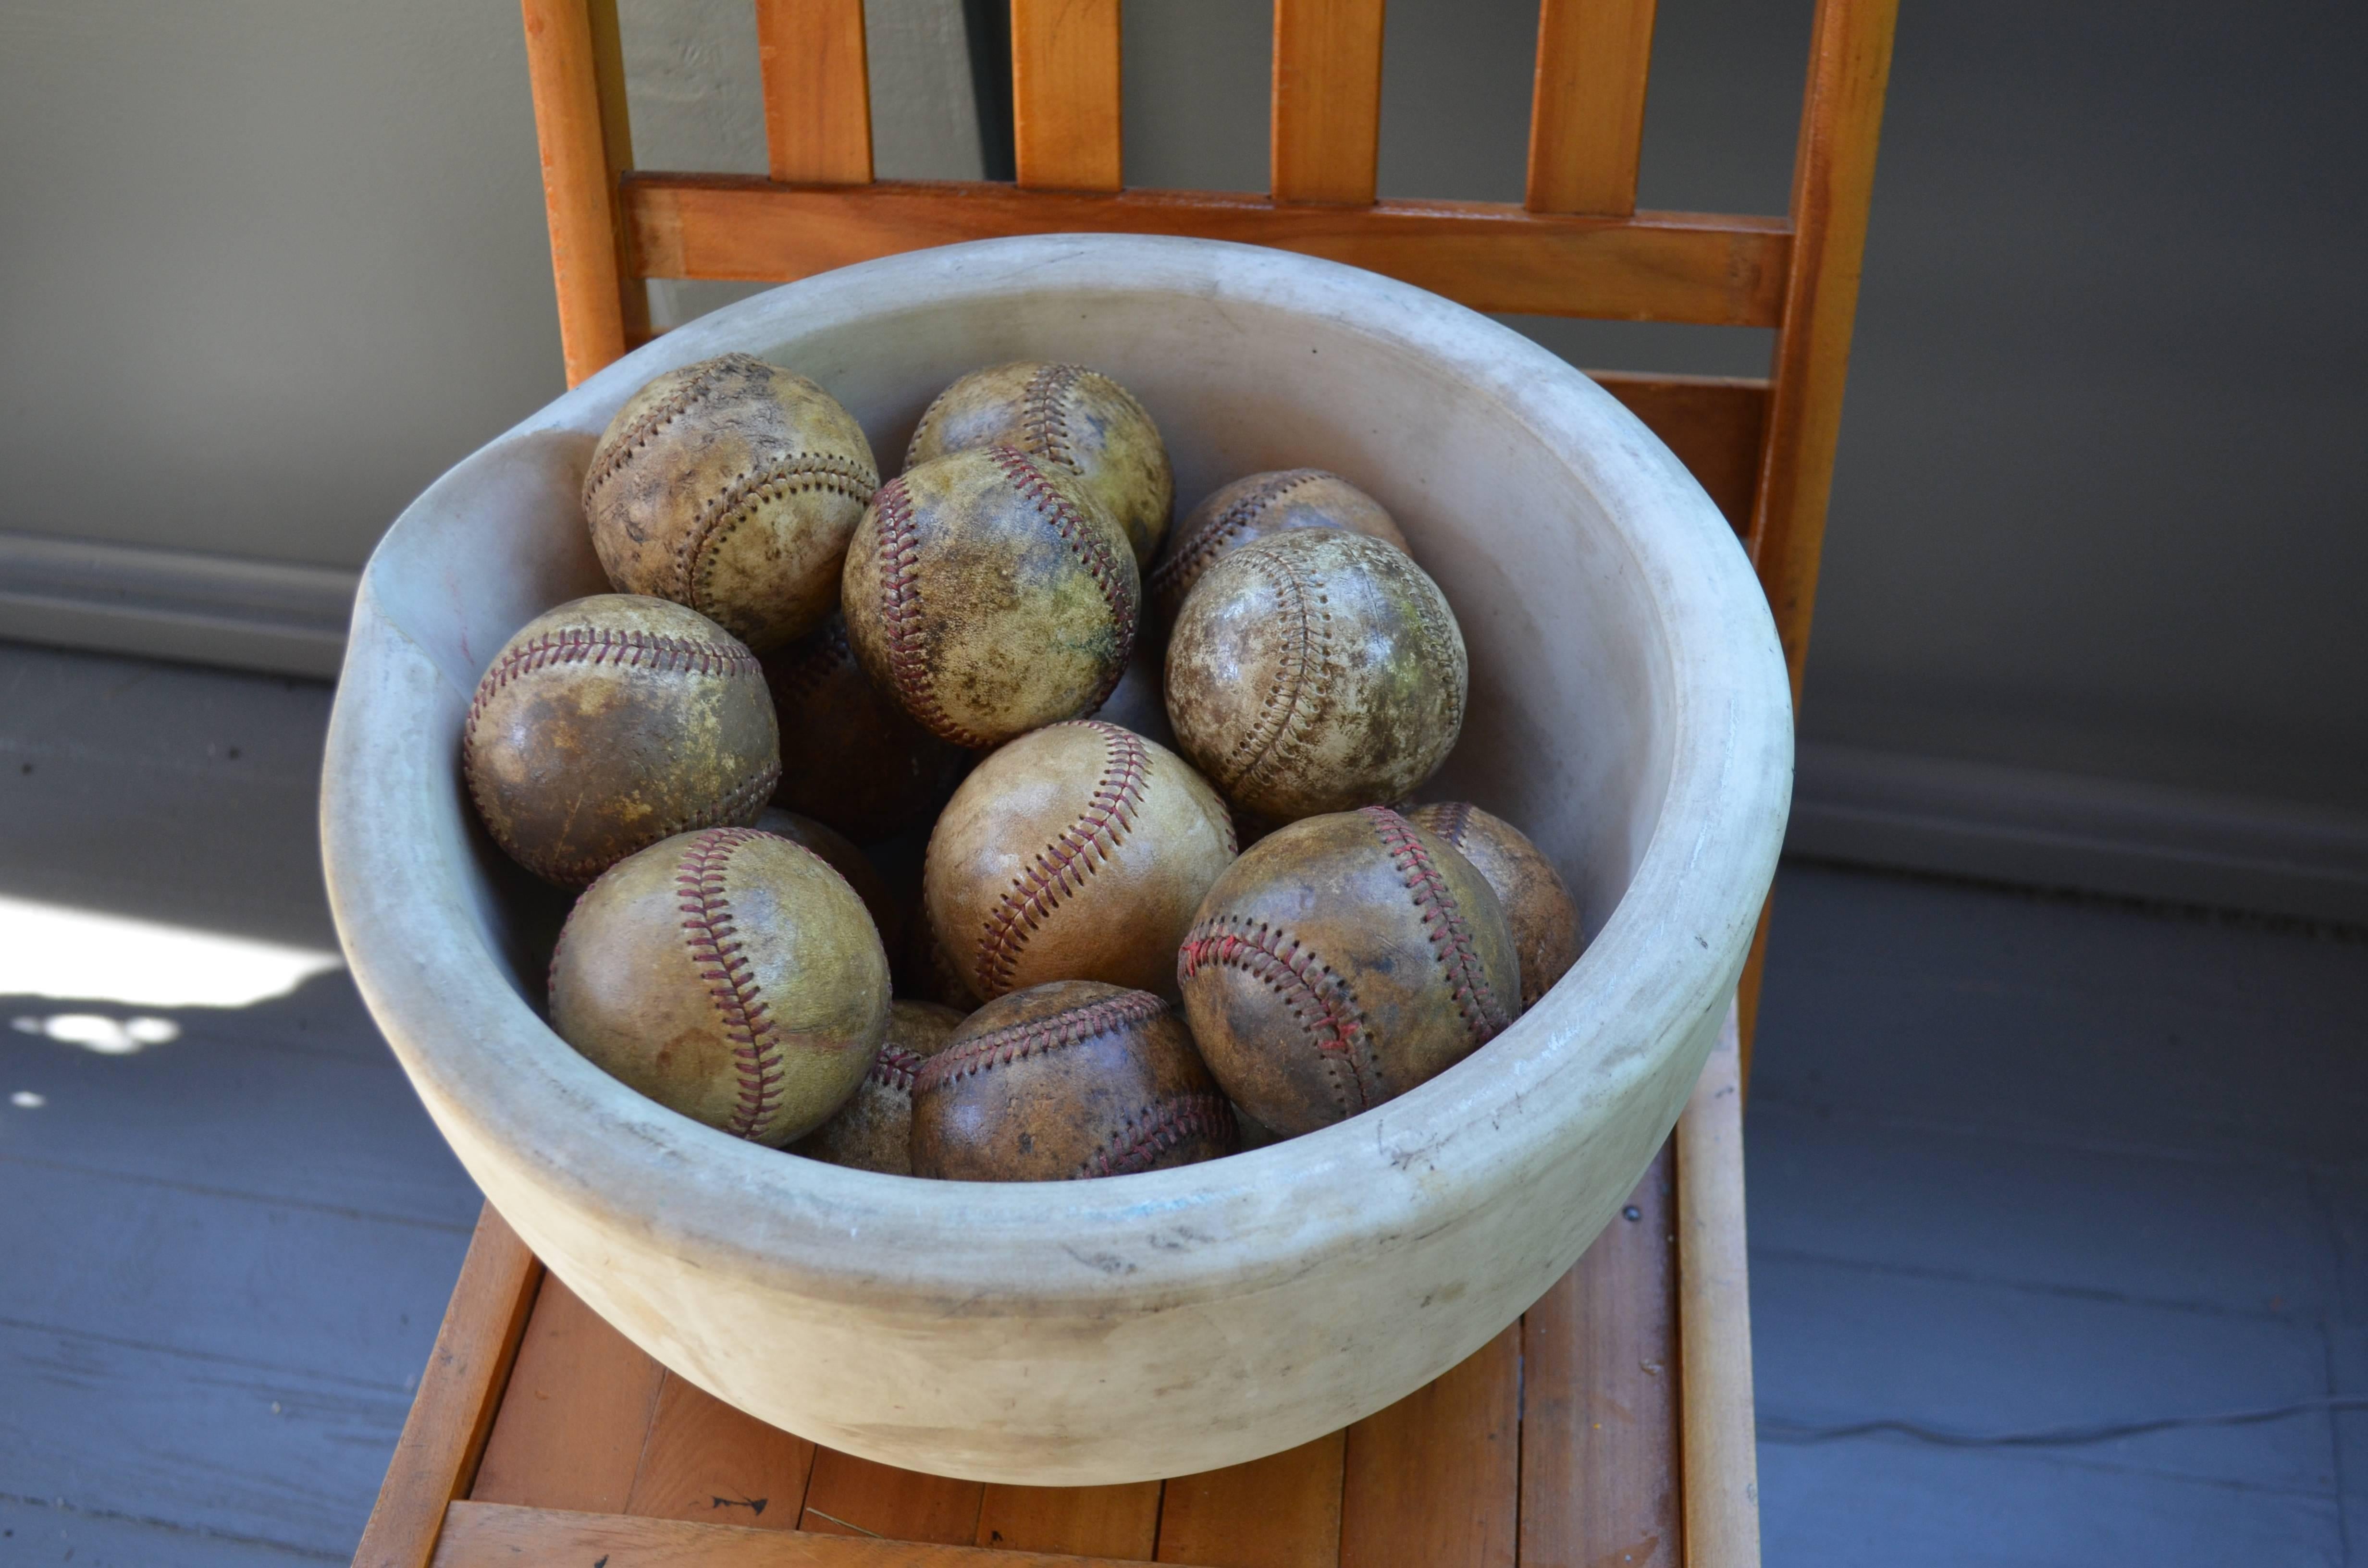 North American Mortar Bowl of Antique Stone with Display of Well-Worn Baseballs